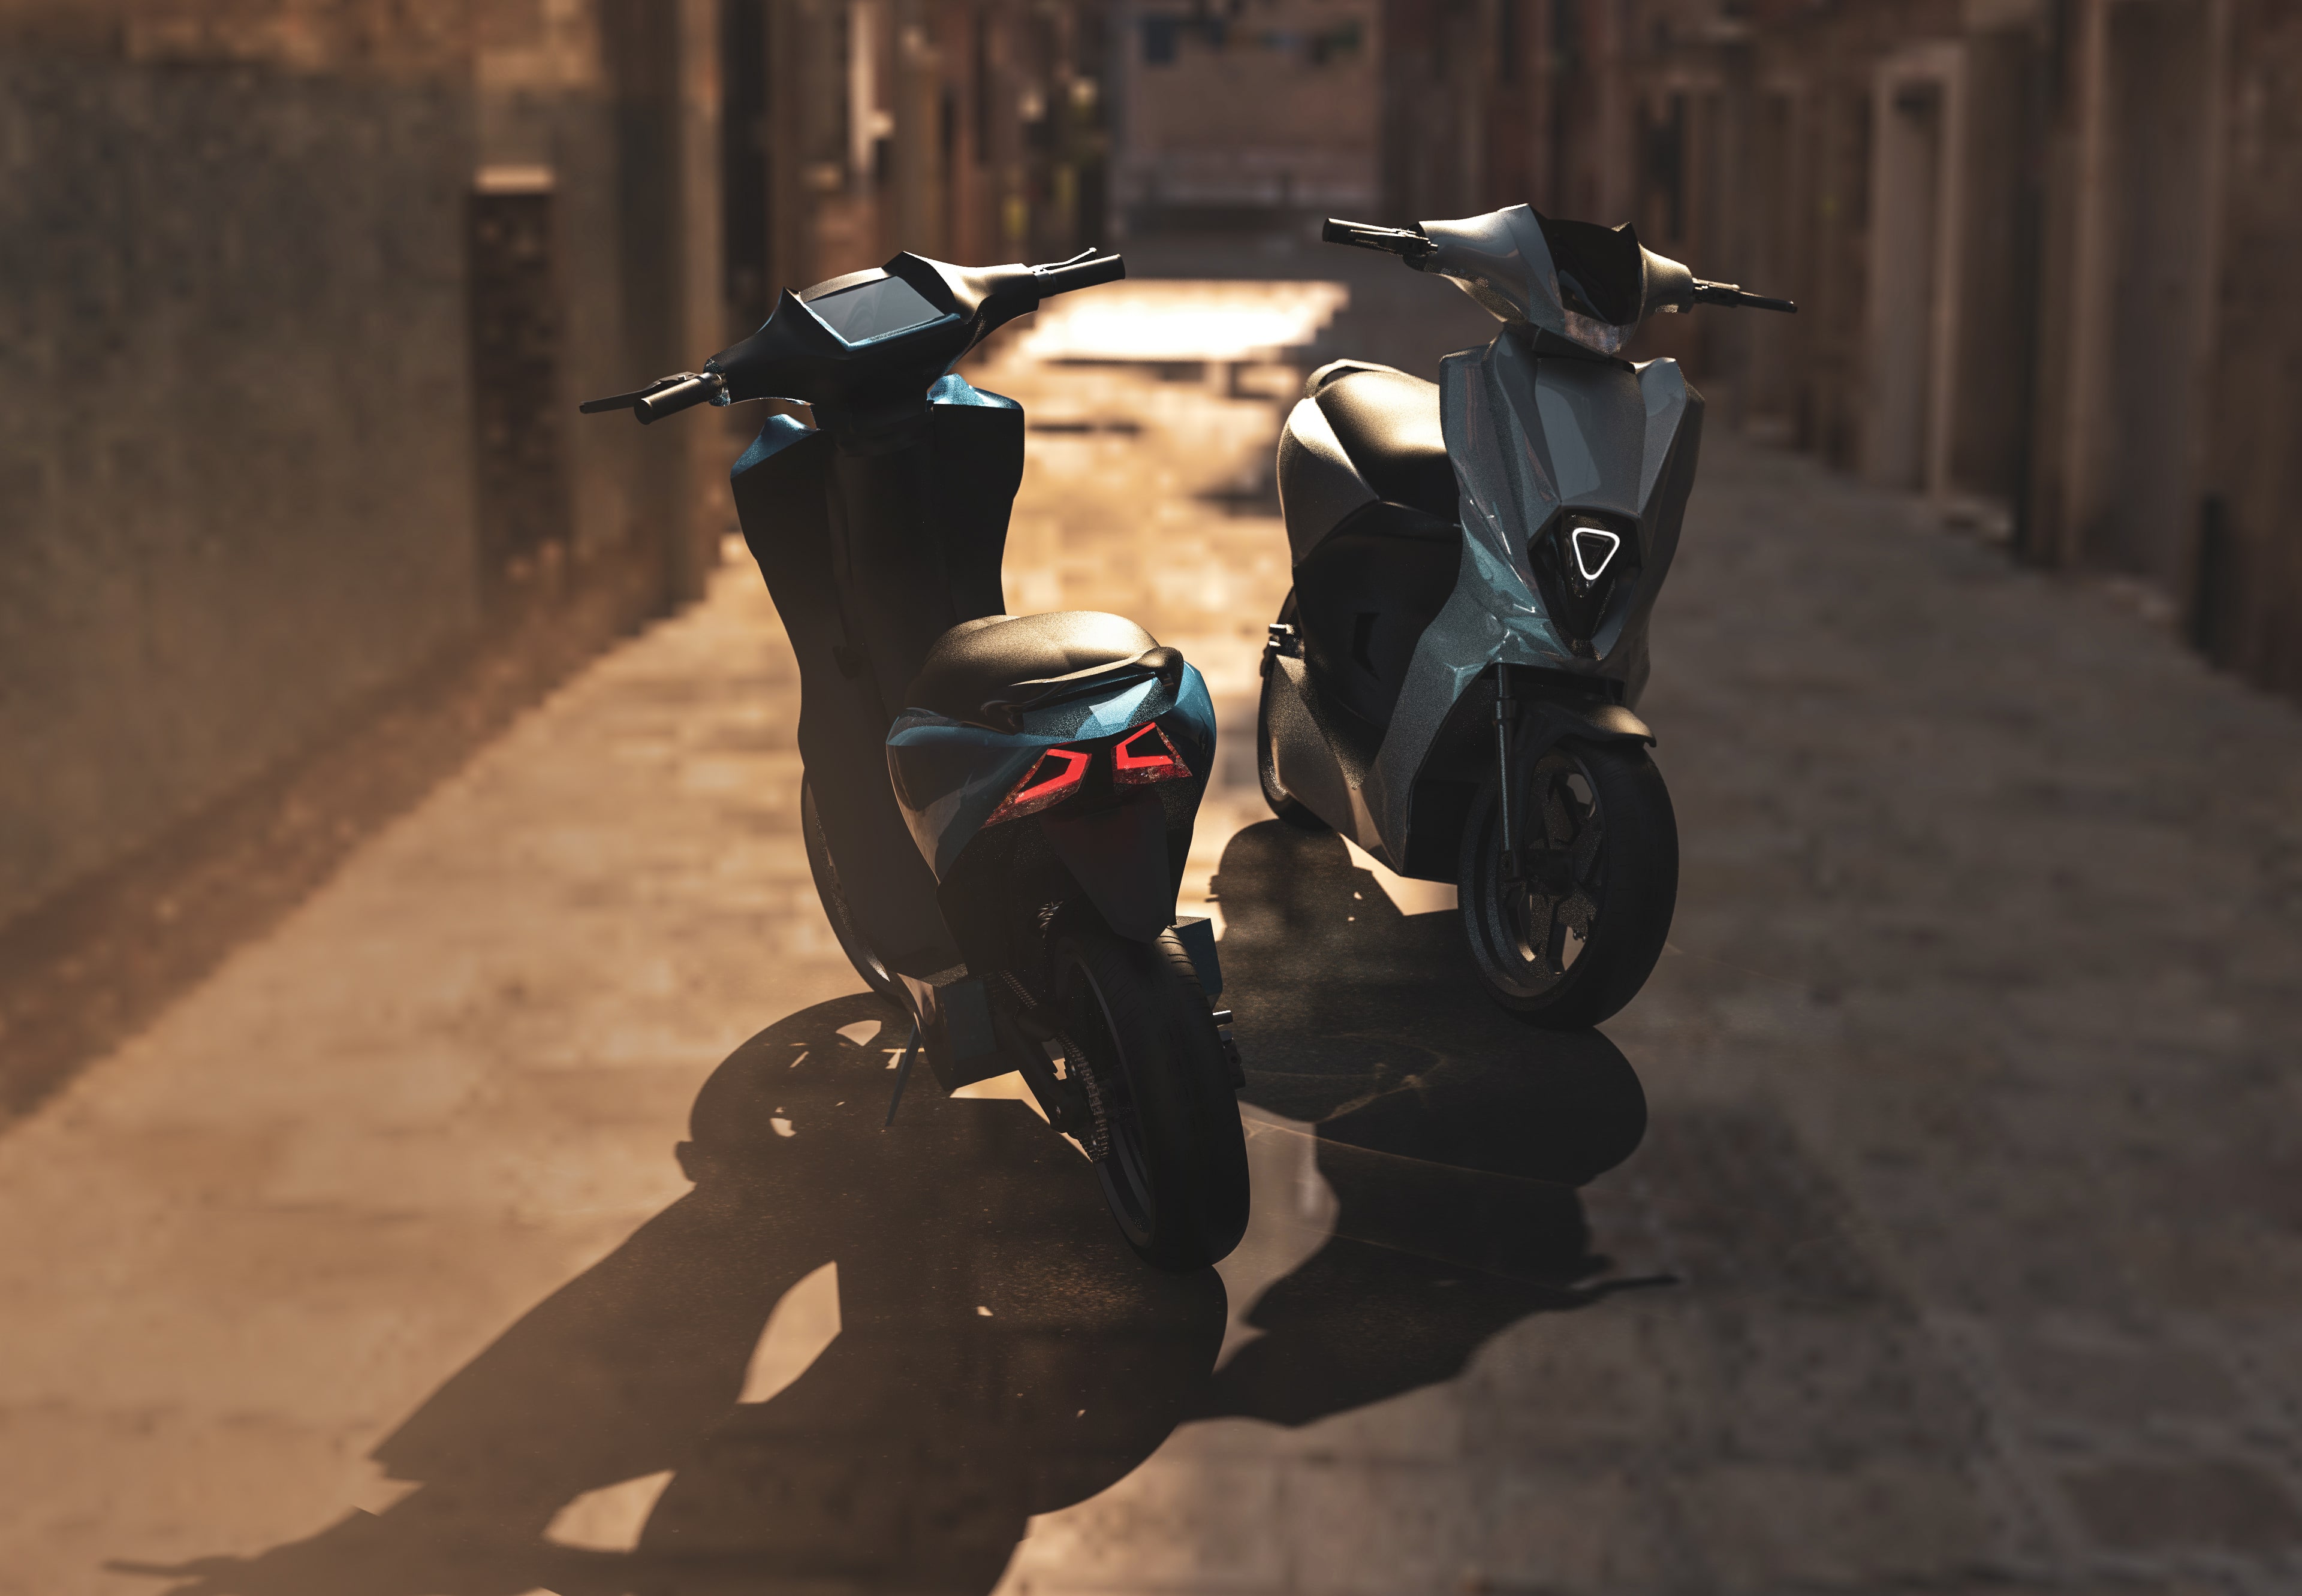 Simple Energy Designs its First Electric Scooter, Simple Mark 2 on Dassault Systèmes’ 3DEXPERIENCE Platform on the Cloud